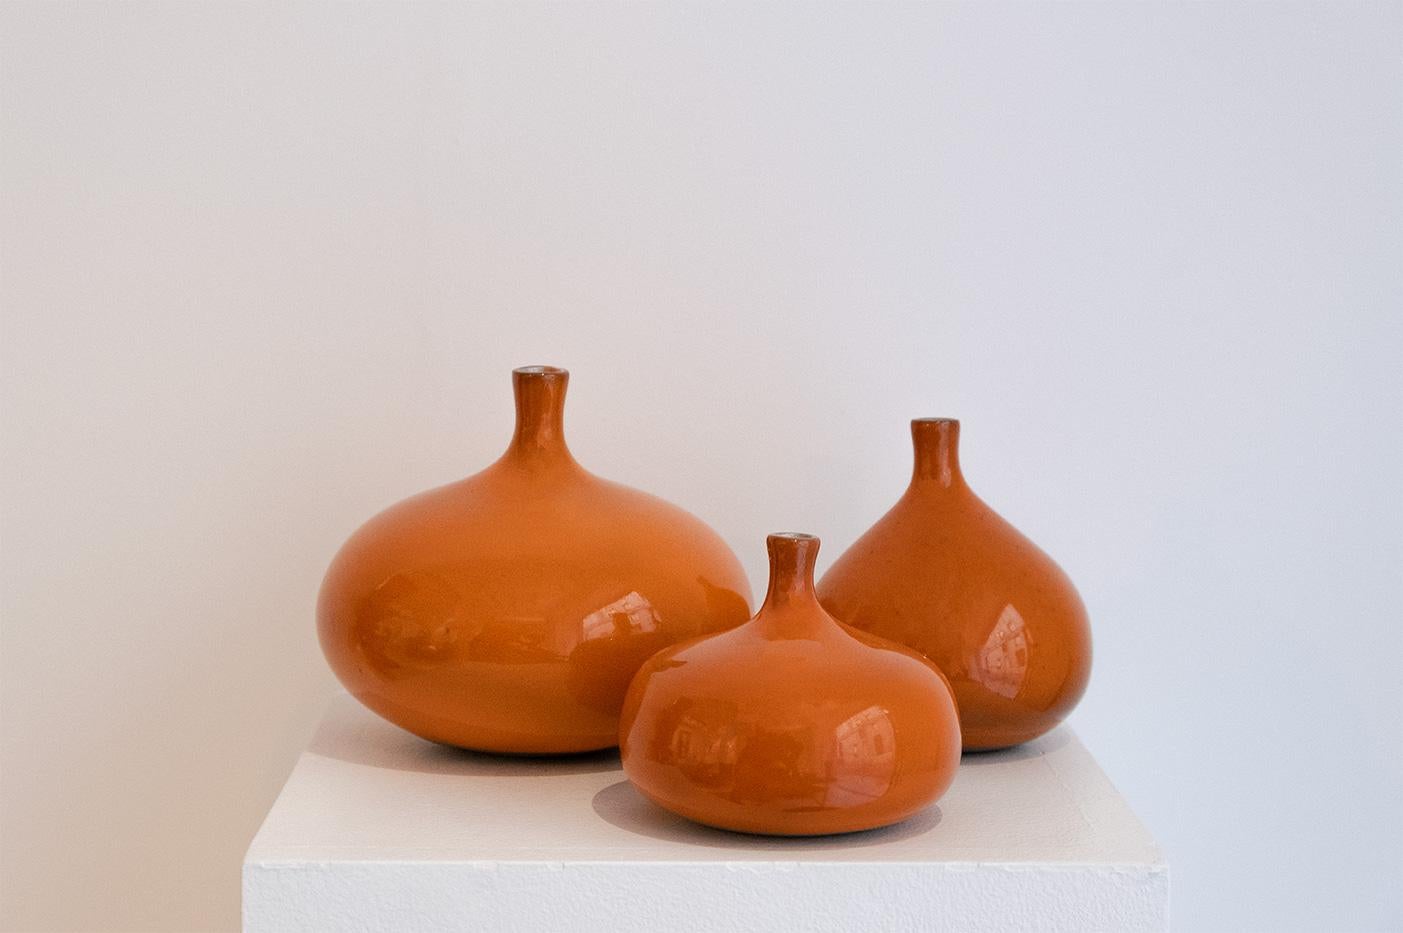 Jacques (1926-2008) et Dani (1933-2010) RUELLAND.

Beautiful and rare orange enamelled set of vases by Jacques and Dani Ruelland.
France, circa 1960
Bright and cheerful artworks that catch the eye!.

Wide flat peach : Height : 4 3/4 in - width